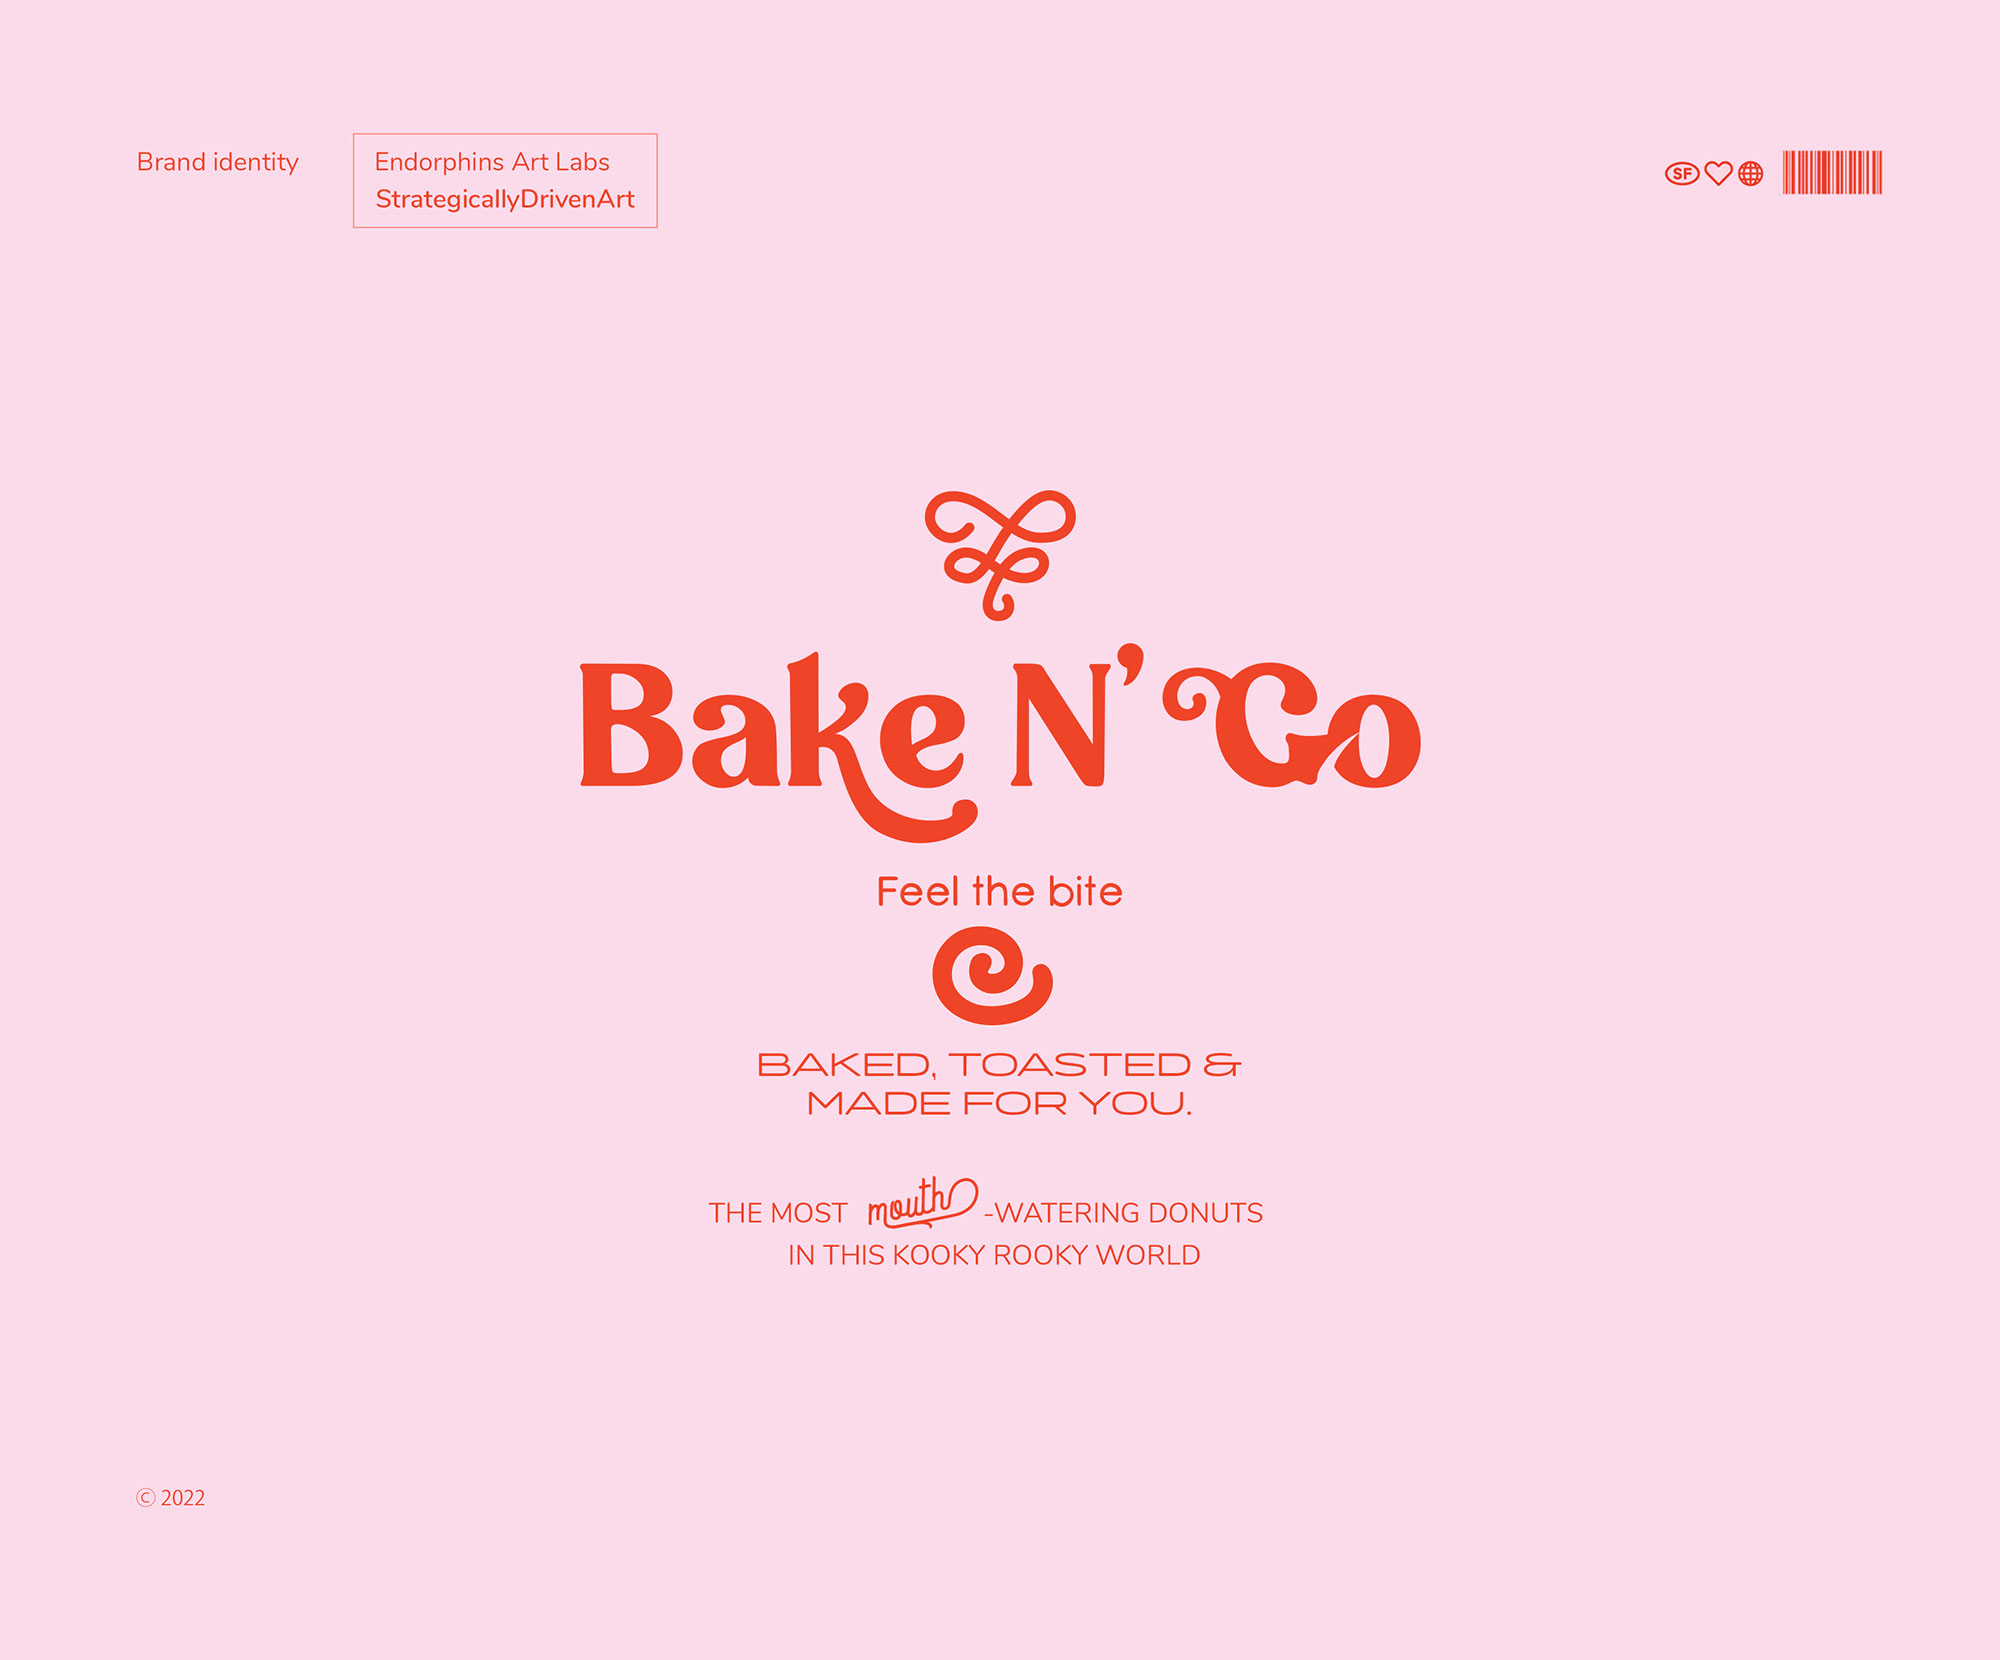 Sweet Visual Identity And Even Sweeter Donuts – Bake N’ Go Brand Identity By Endorphins Art Labs.